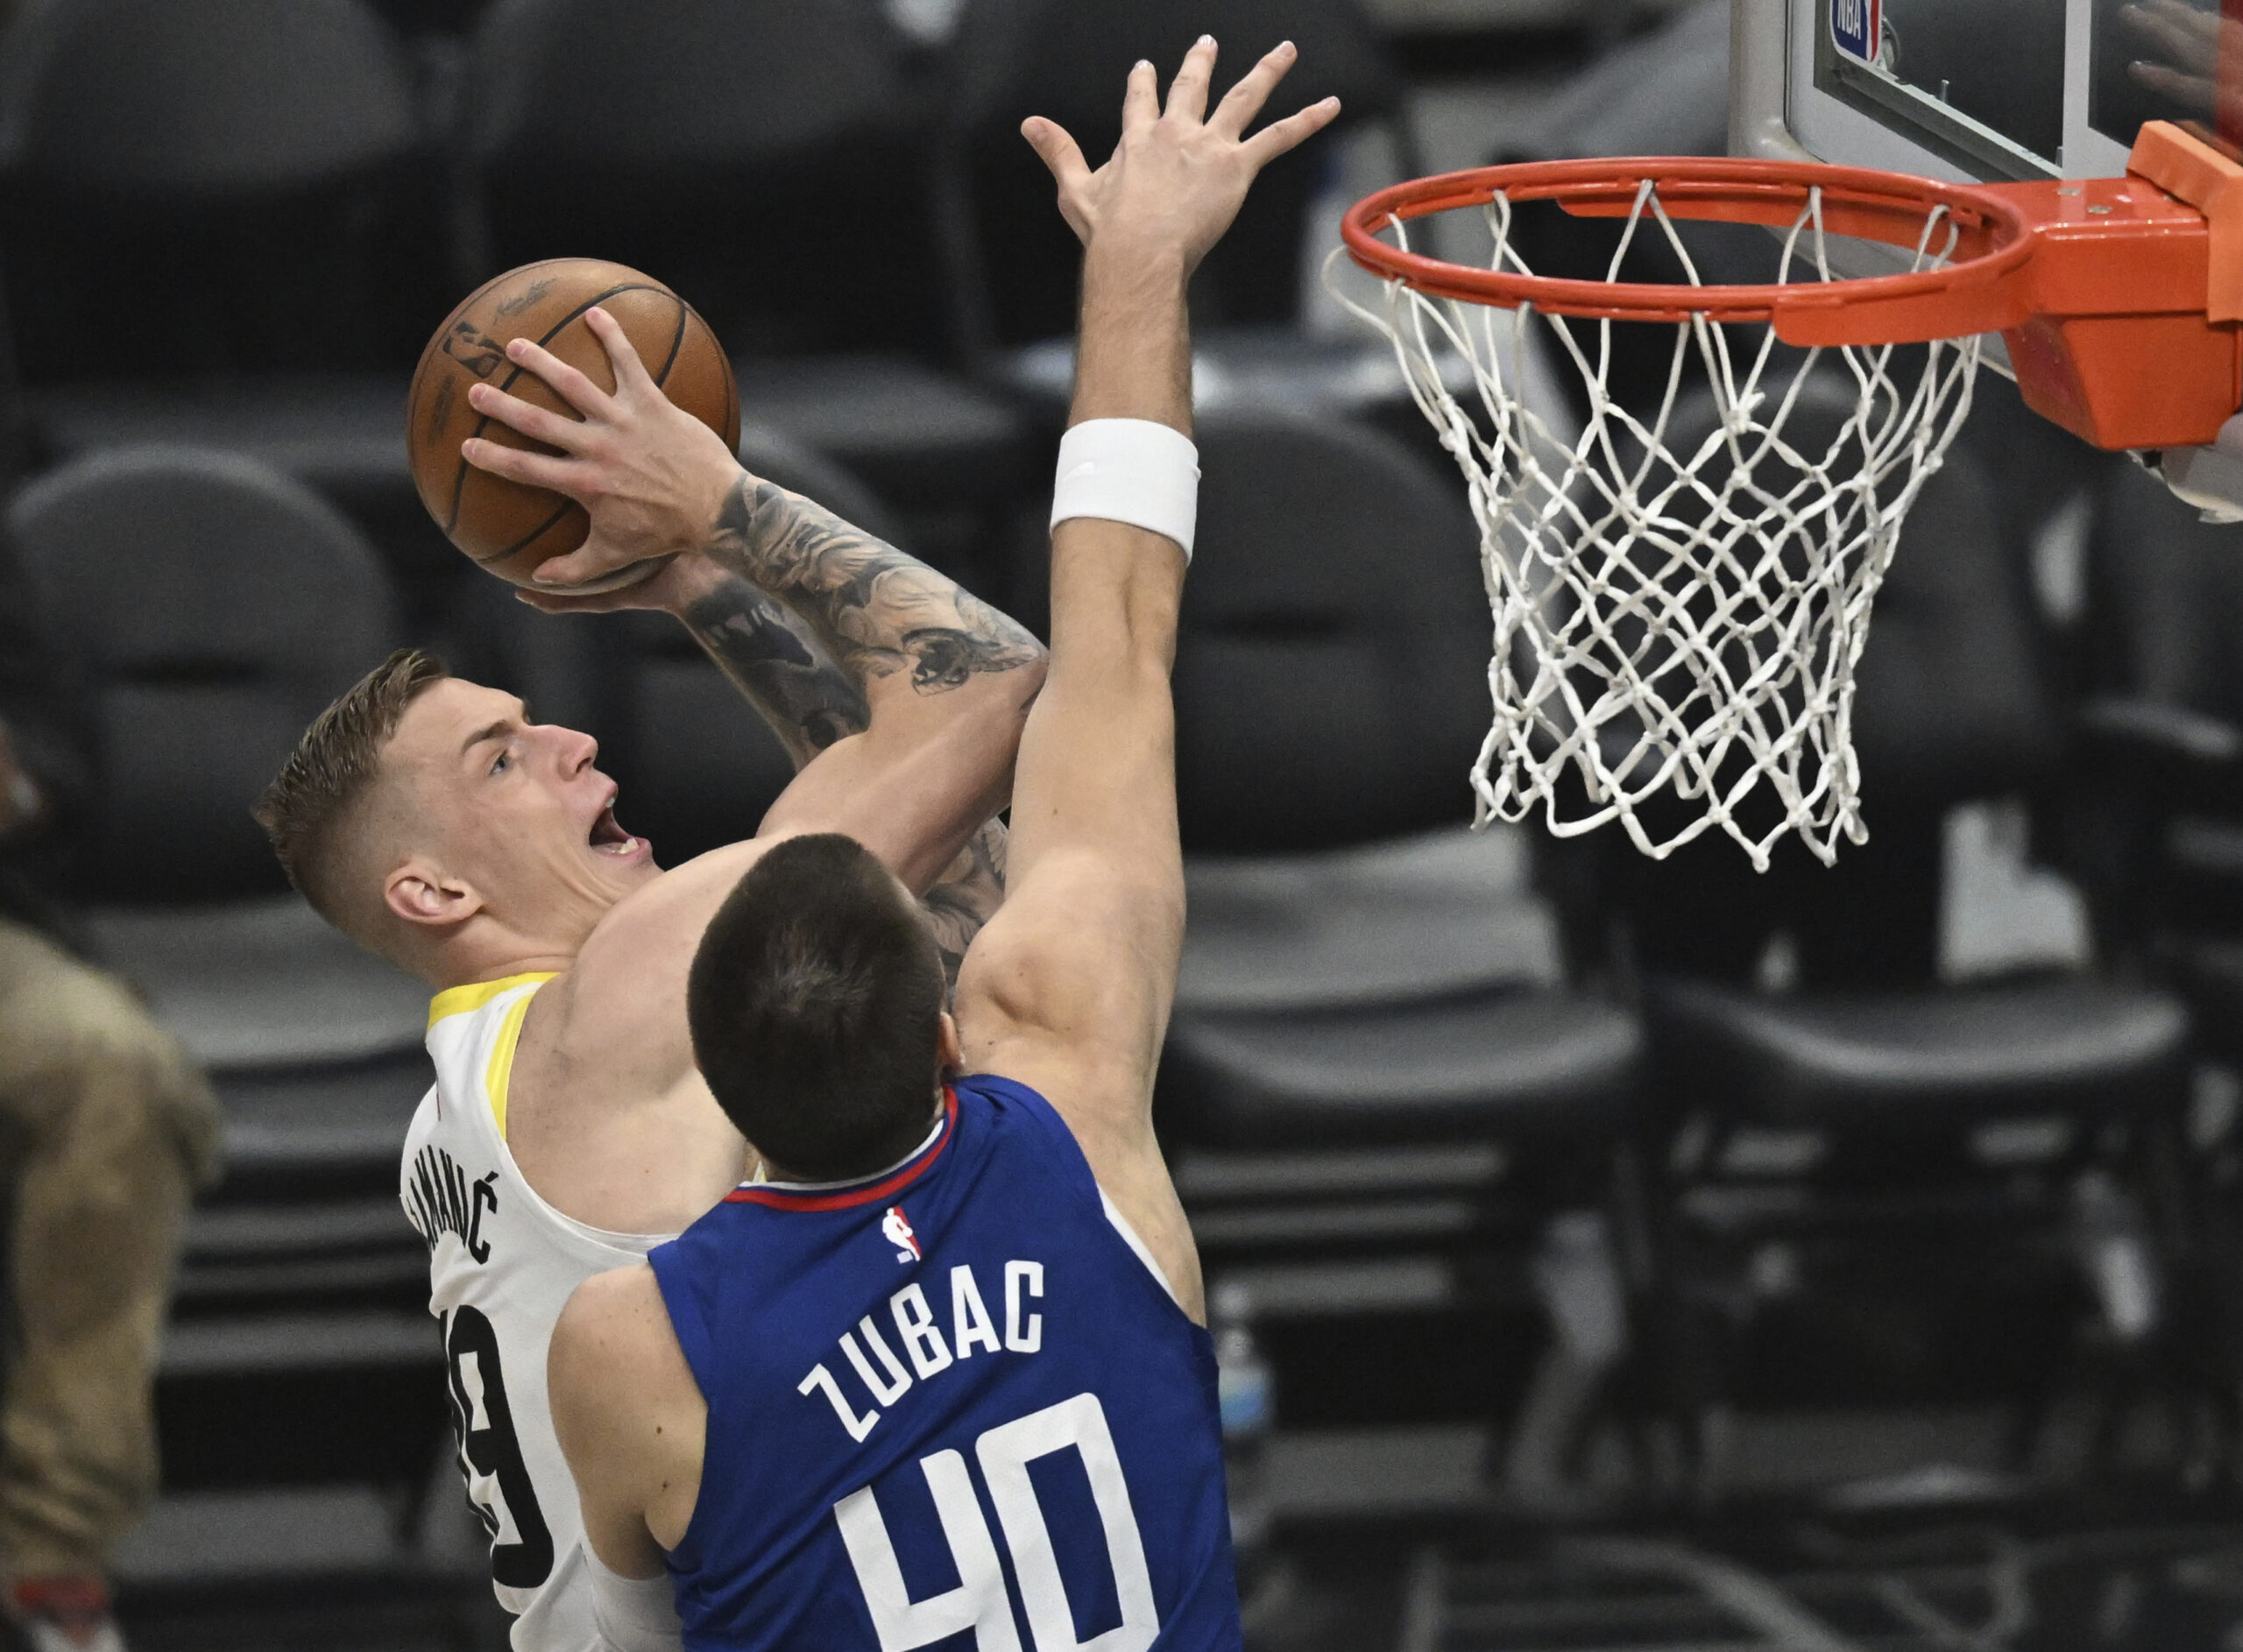 LOS ANGELES, CA - APRIL 12: Utah Jazz Forward Luka Samanic (19) shoots over Los Angeles Clippers Center Ivica Zubac (40) during a regular season NBA Basketball game at Crypto.com Arena. (Photo by John McCoy/Icon Sportswire) (Icon Sportswire via AP Images)